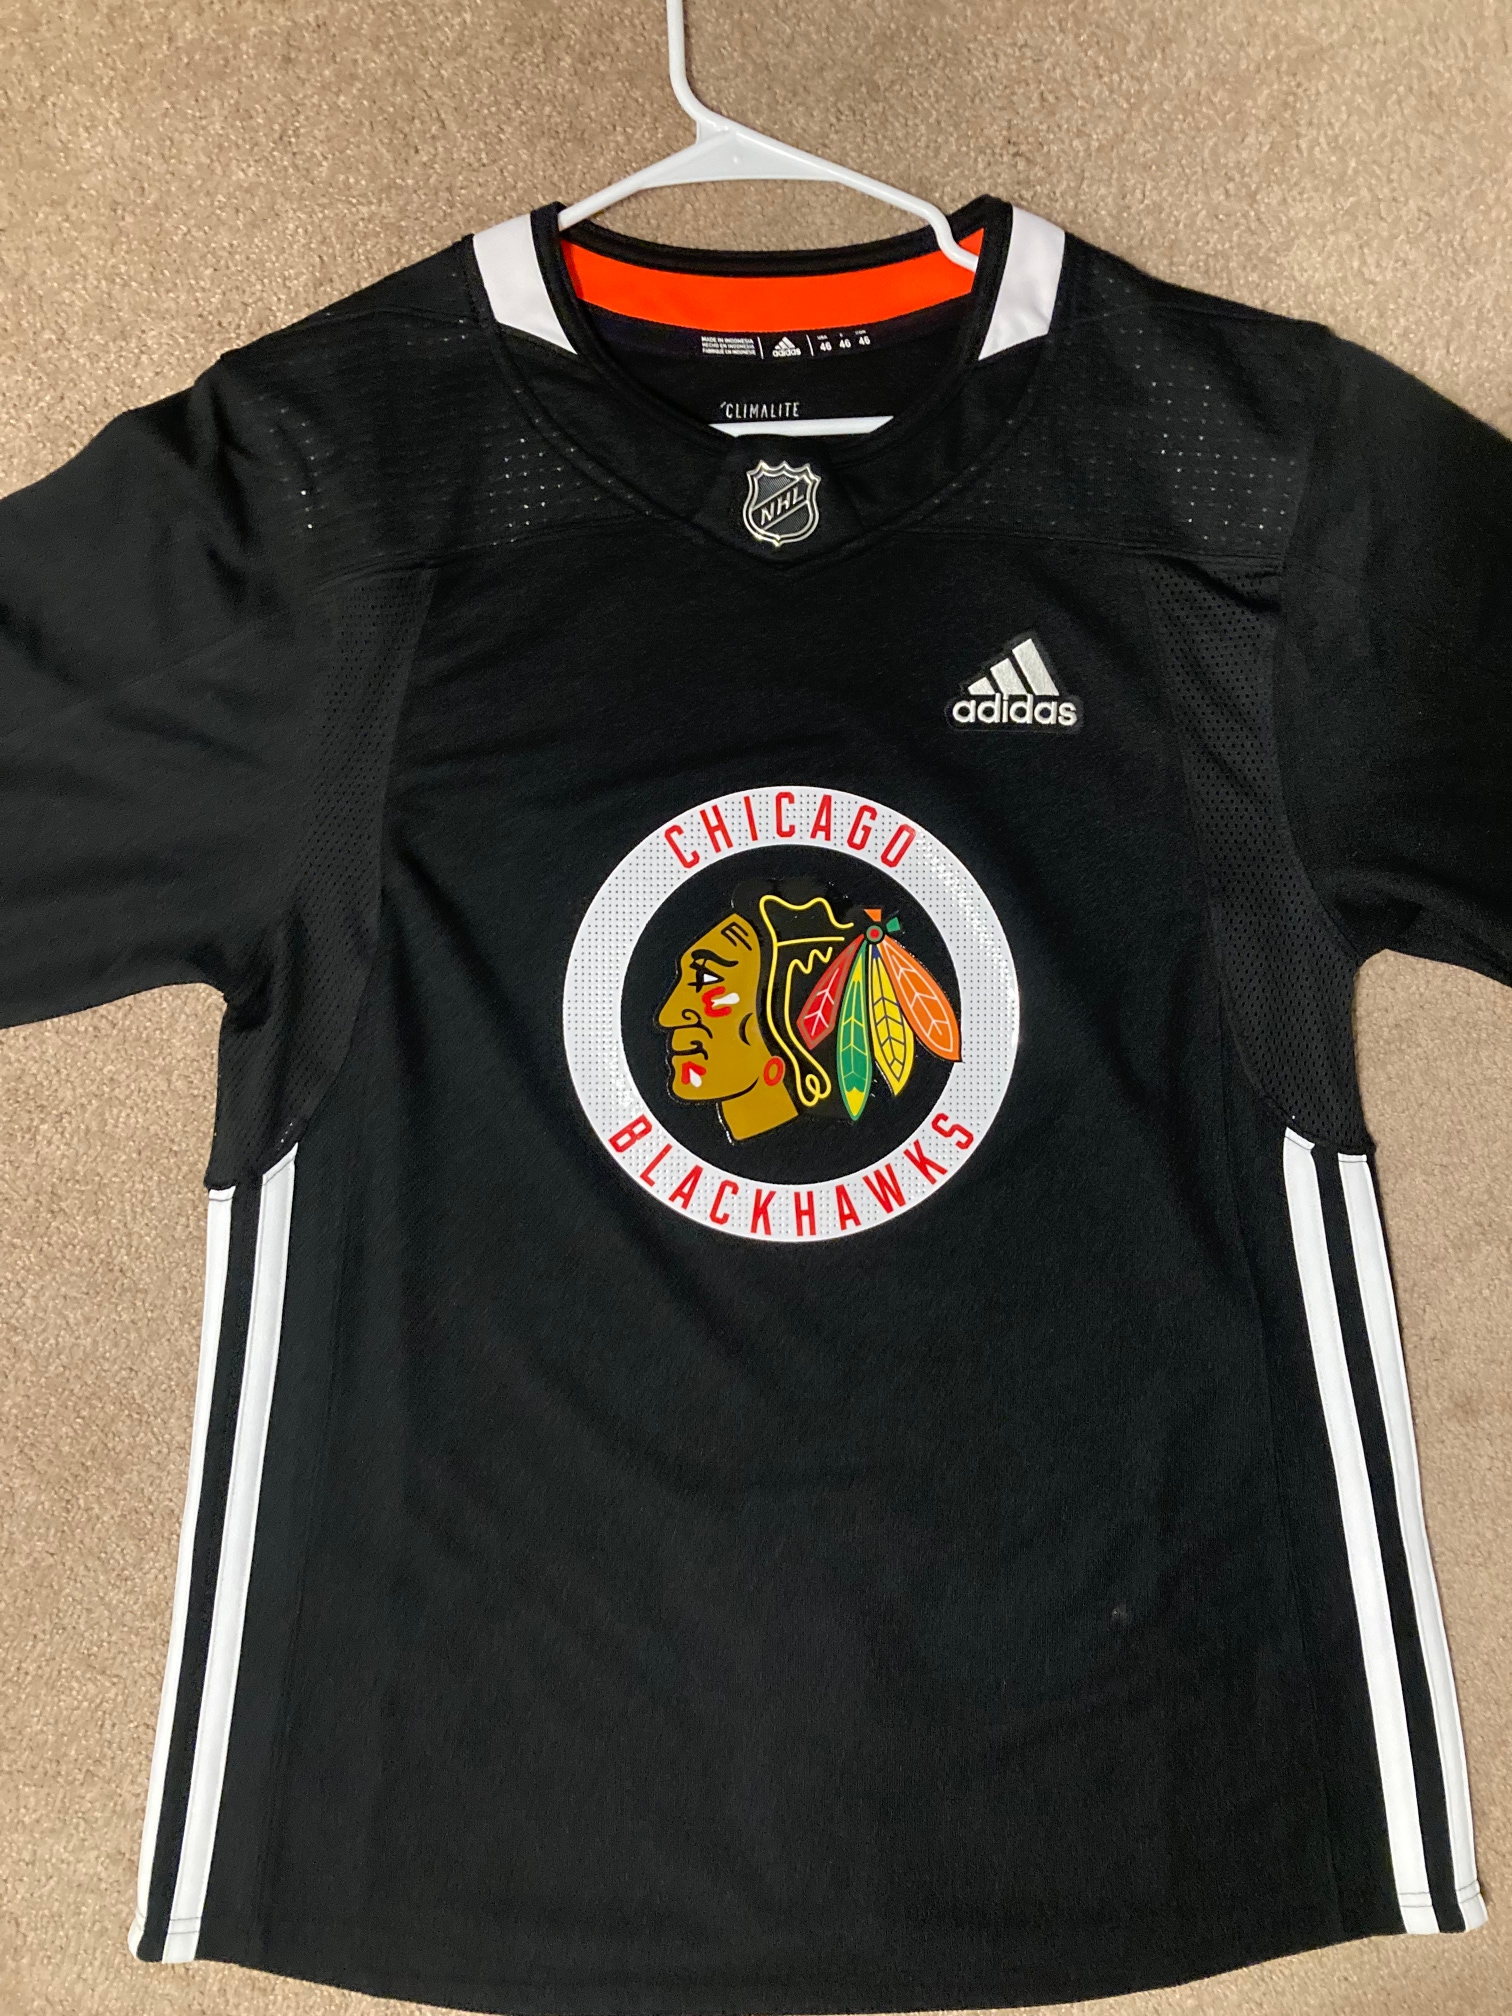 Black Adult Men's Used Small Adidas Jersey